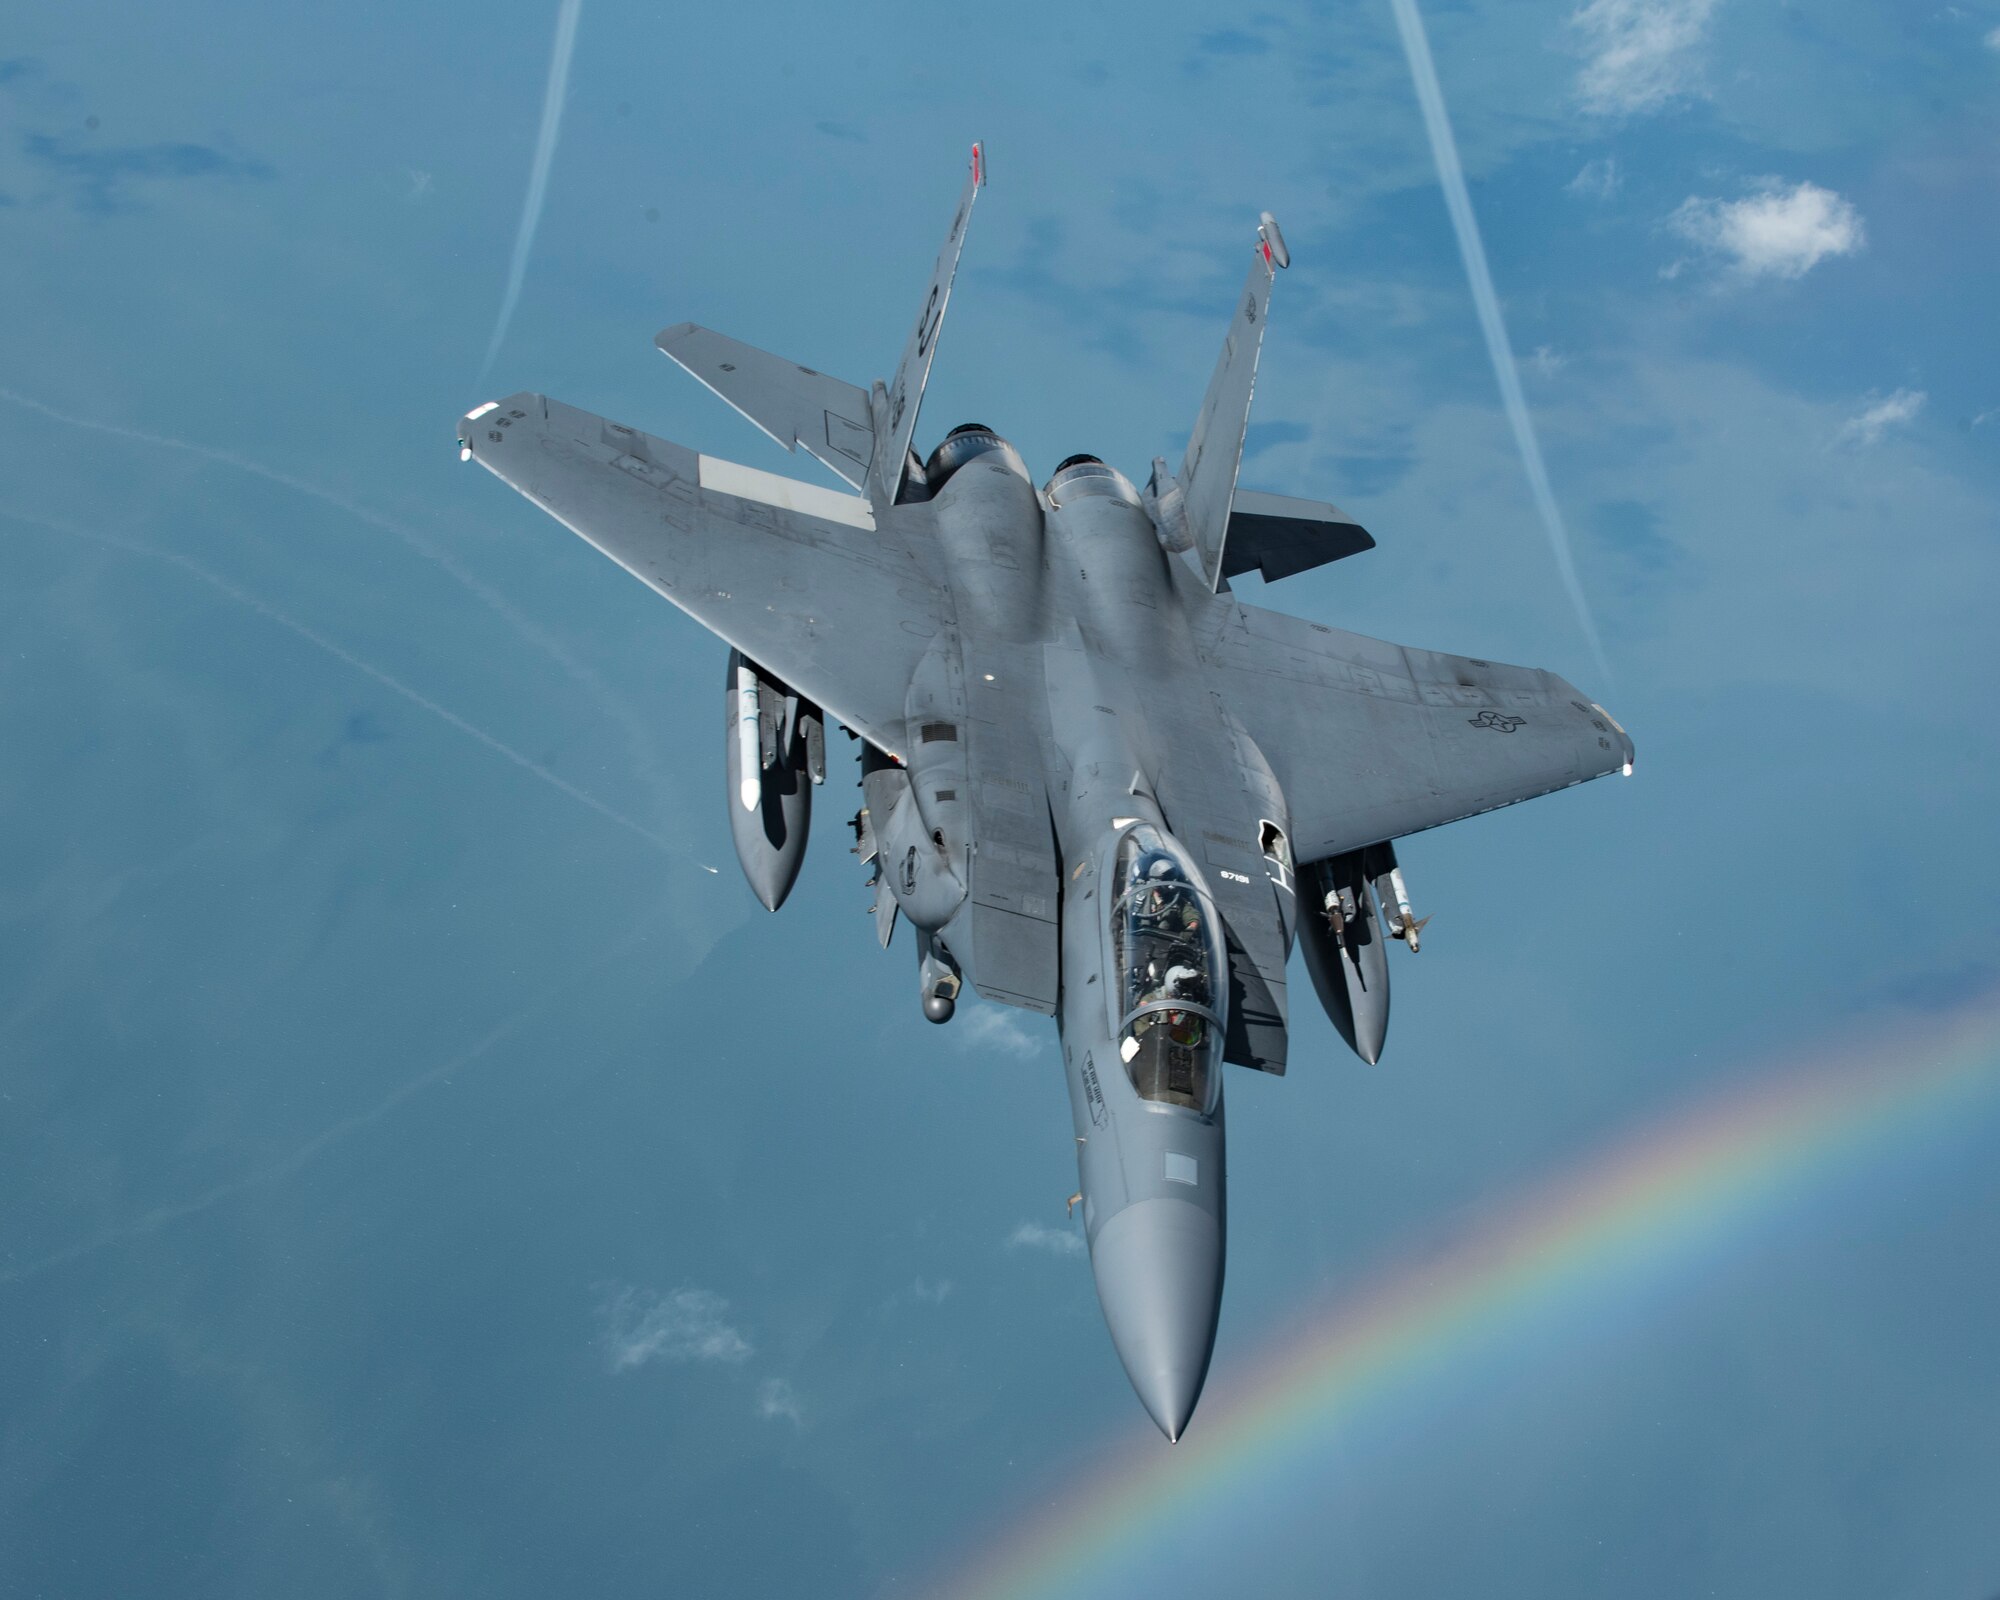 An F-15E Strike Eagle with the 4th Fighter Wing at Seymour Johnson Air Force Base, N.C., flies near a rainbow over the southeastern U.S. Aug. 8, 2018. The Strike Eagle had just been refueled by a KC-135 Stratotanker with the 121st Air Refueling Wing out of Ohio. (U.S. Air National Guard photo by Airman 1st Class Tiffany A. Emery)